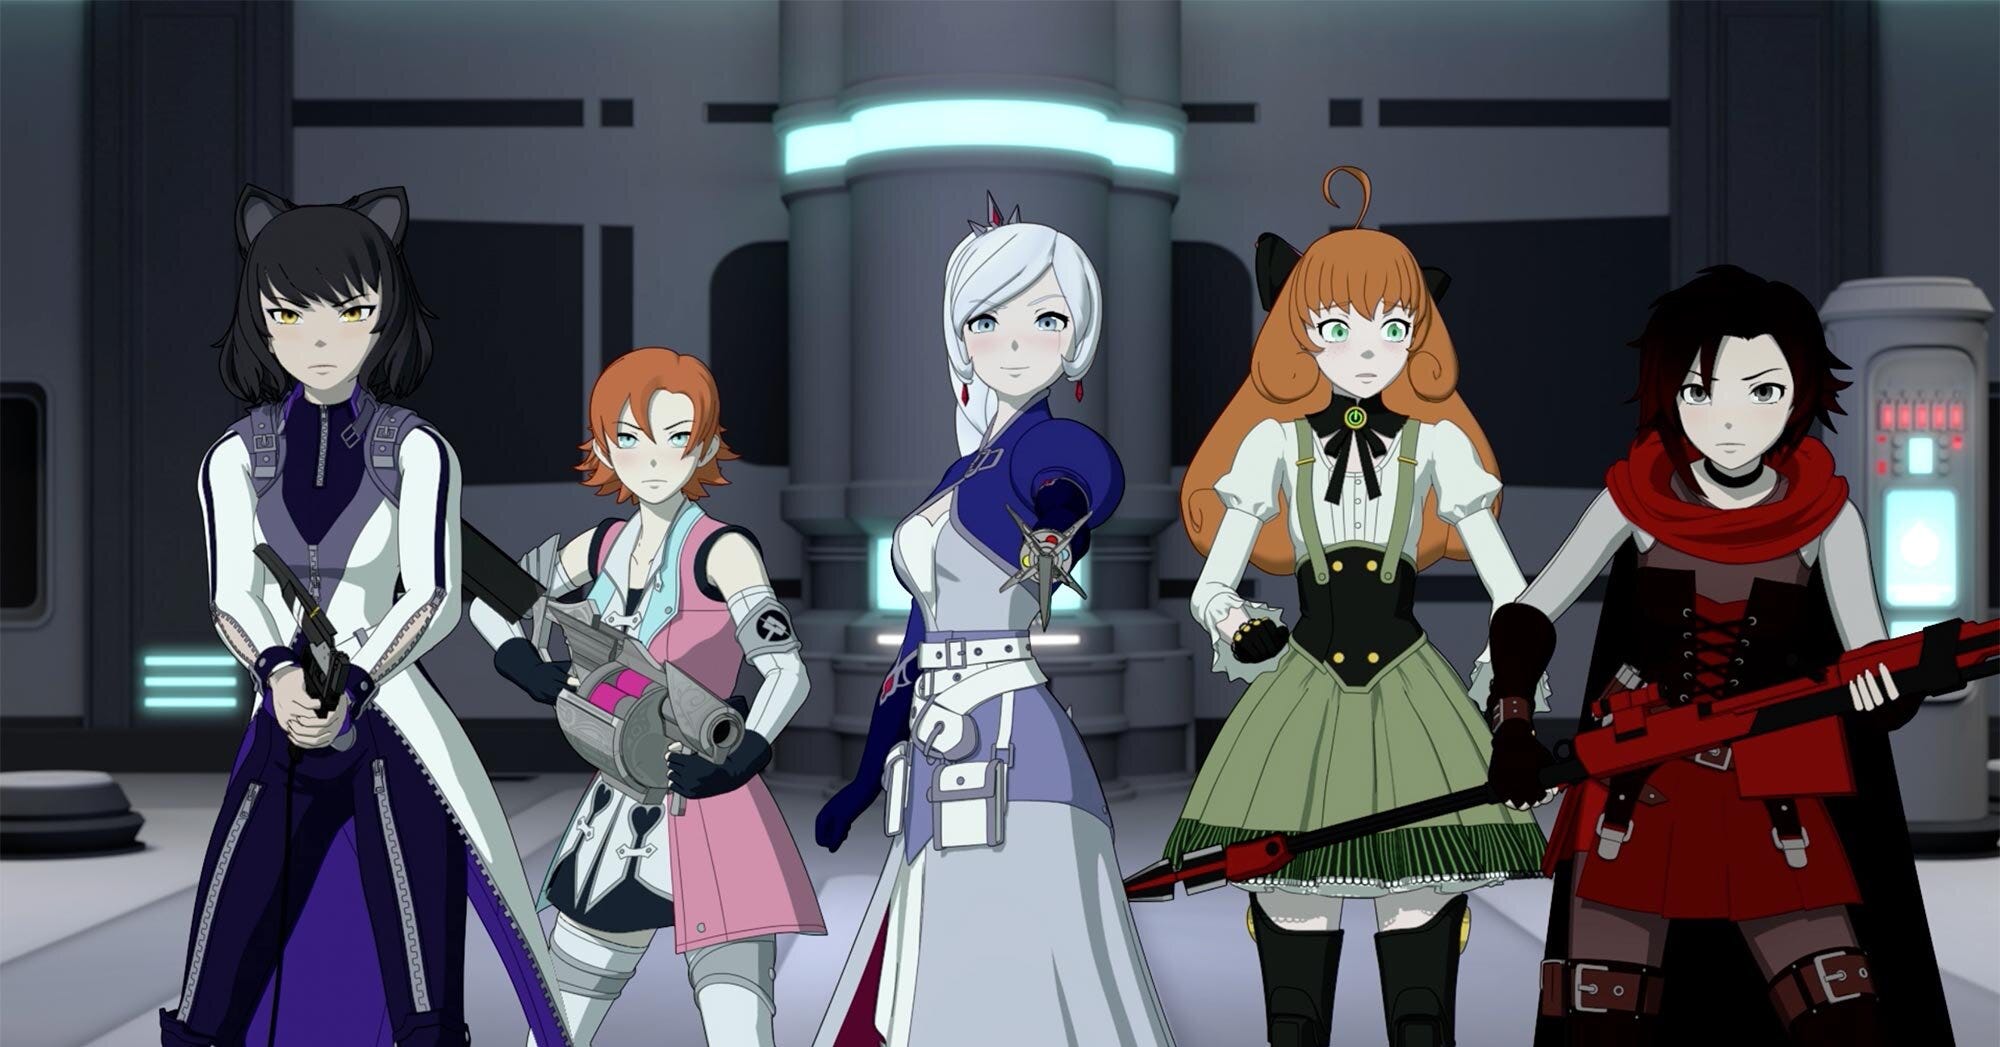 Ver Rwby Temporada 8 Capitulo 8 Chapter 2 Rooster Teeth S By Del Is O N I A Rwby S08 E02 Medium